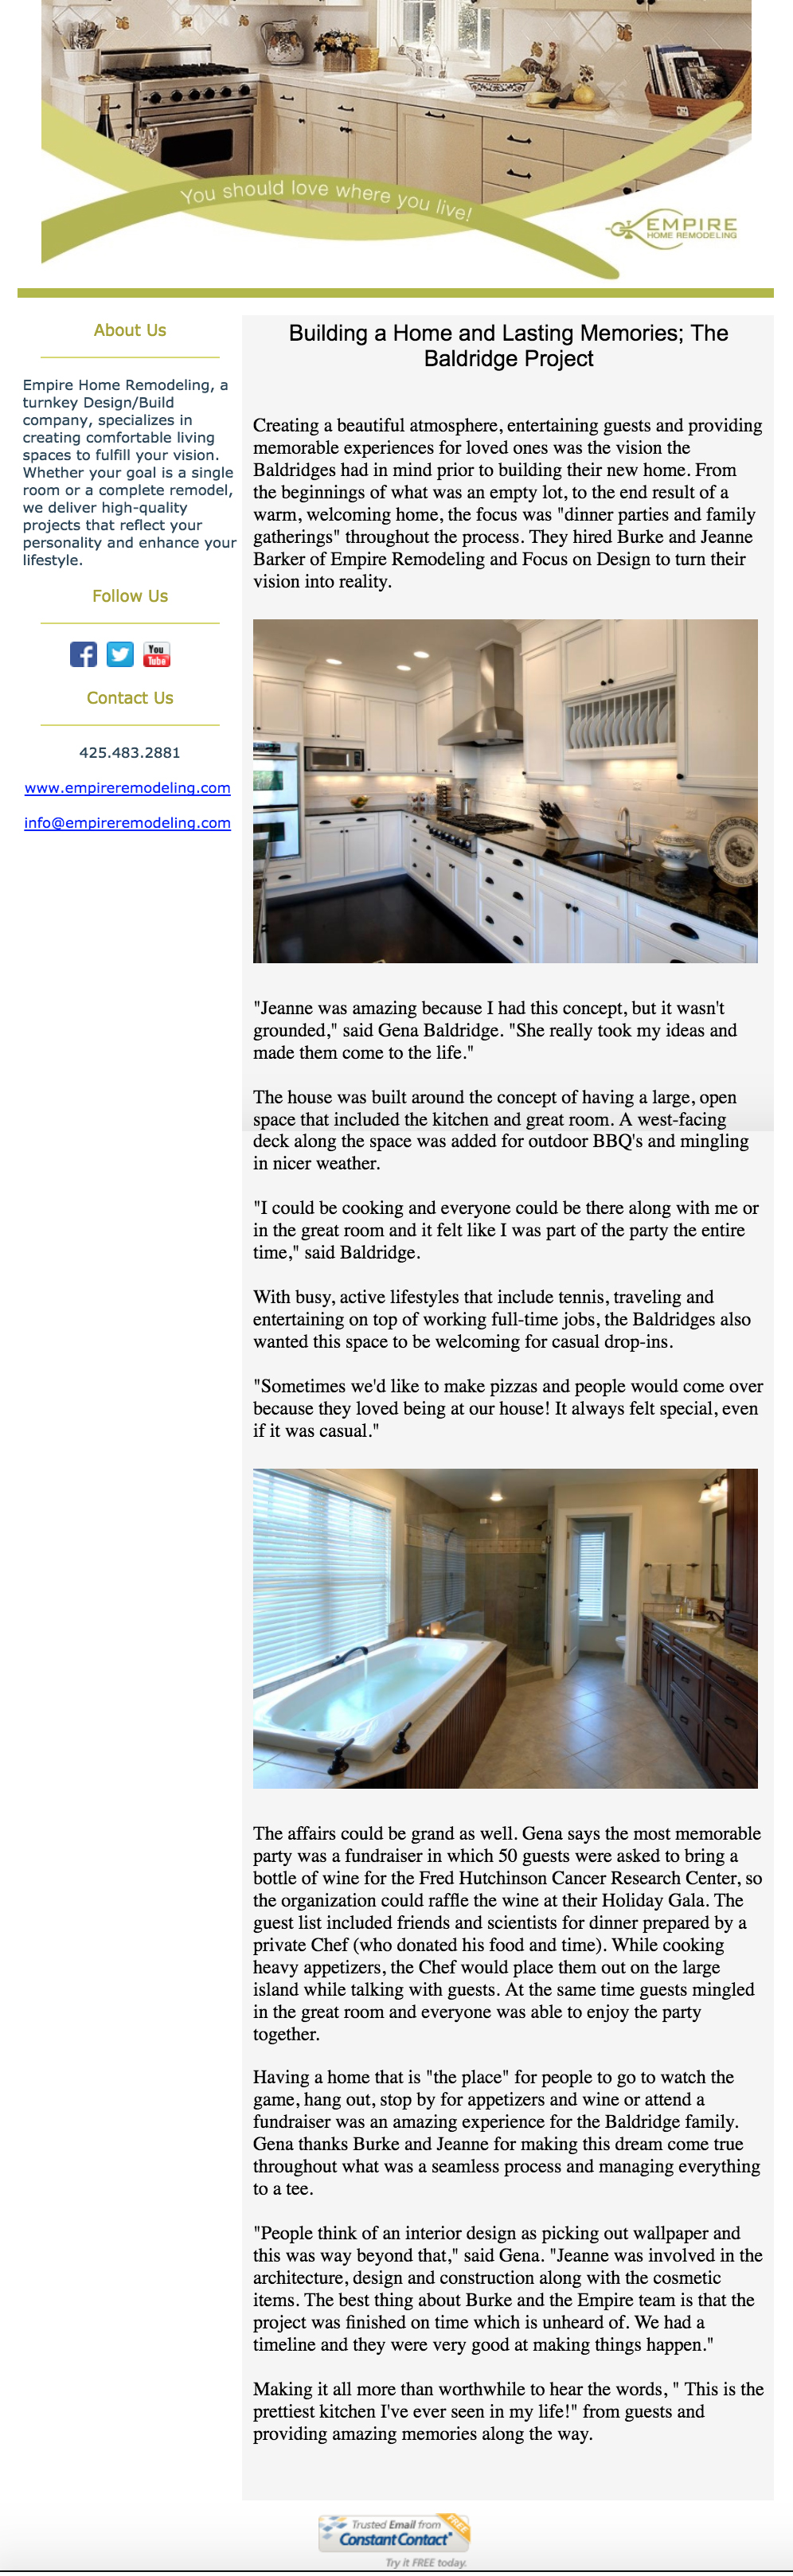 Newsletter made for Empire Home Remodeling showcasing their recent remodel projects.